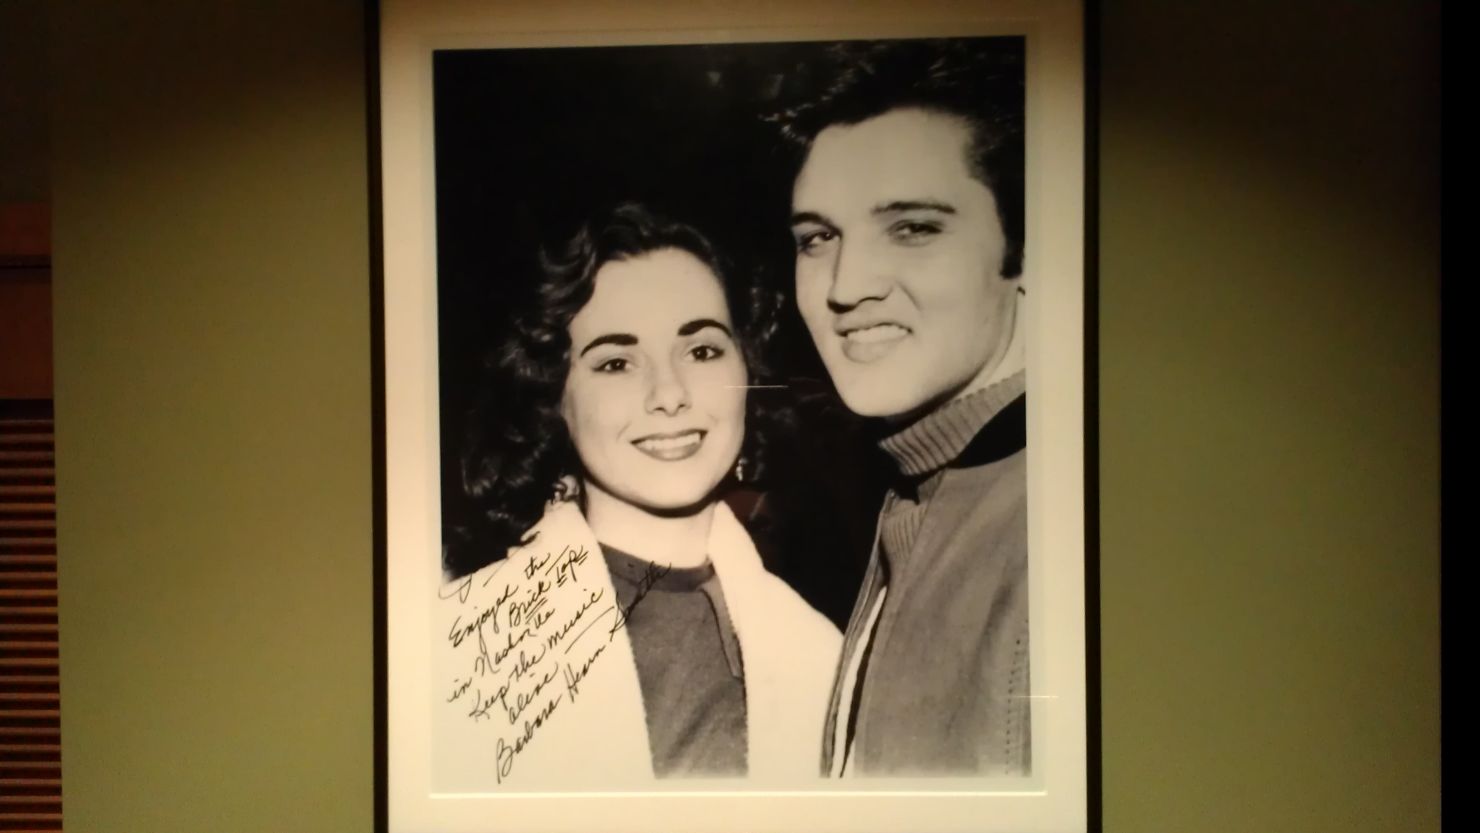 A photo of a young Elvis and his hometown sweetheart, Barbara Hearn, hangs in a Florida restaurant, whose owner is a fan.